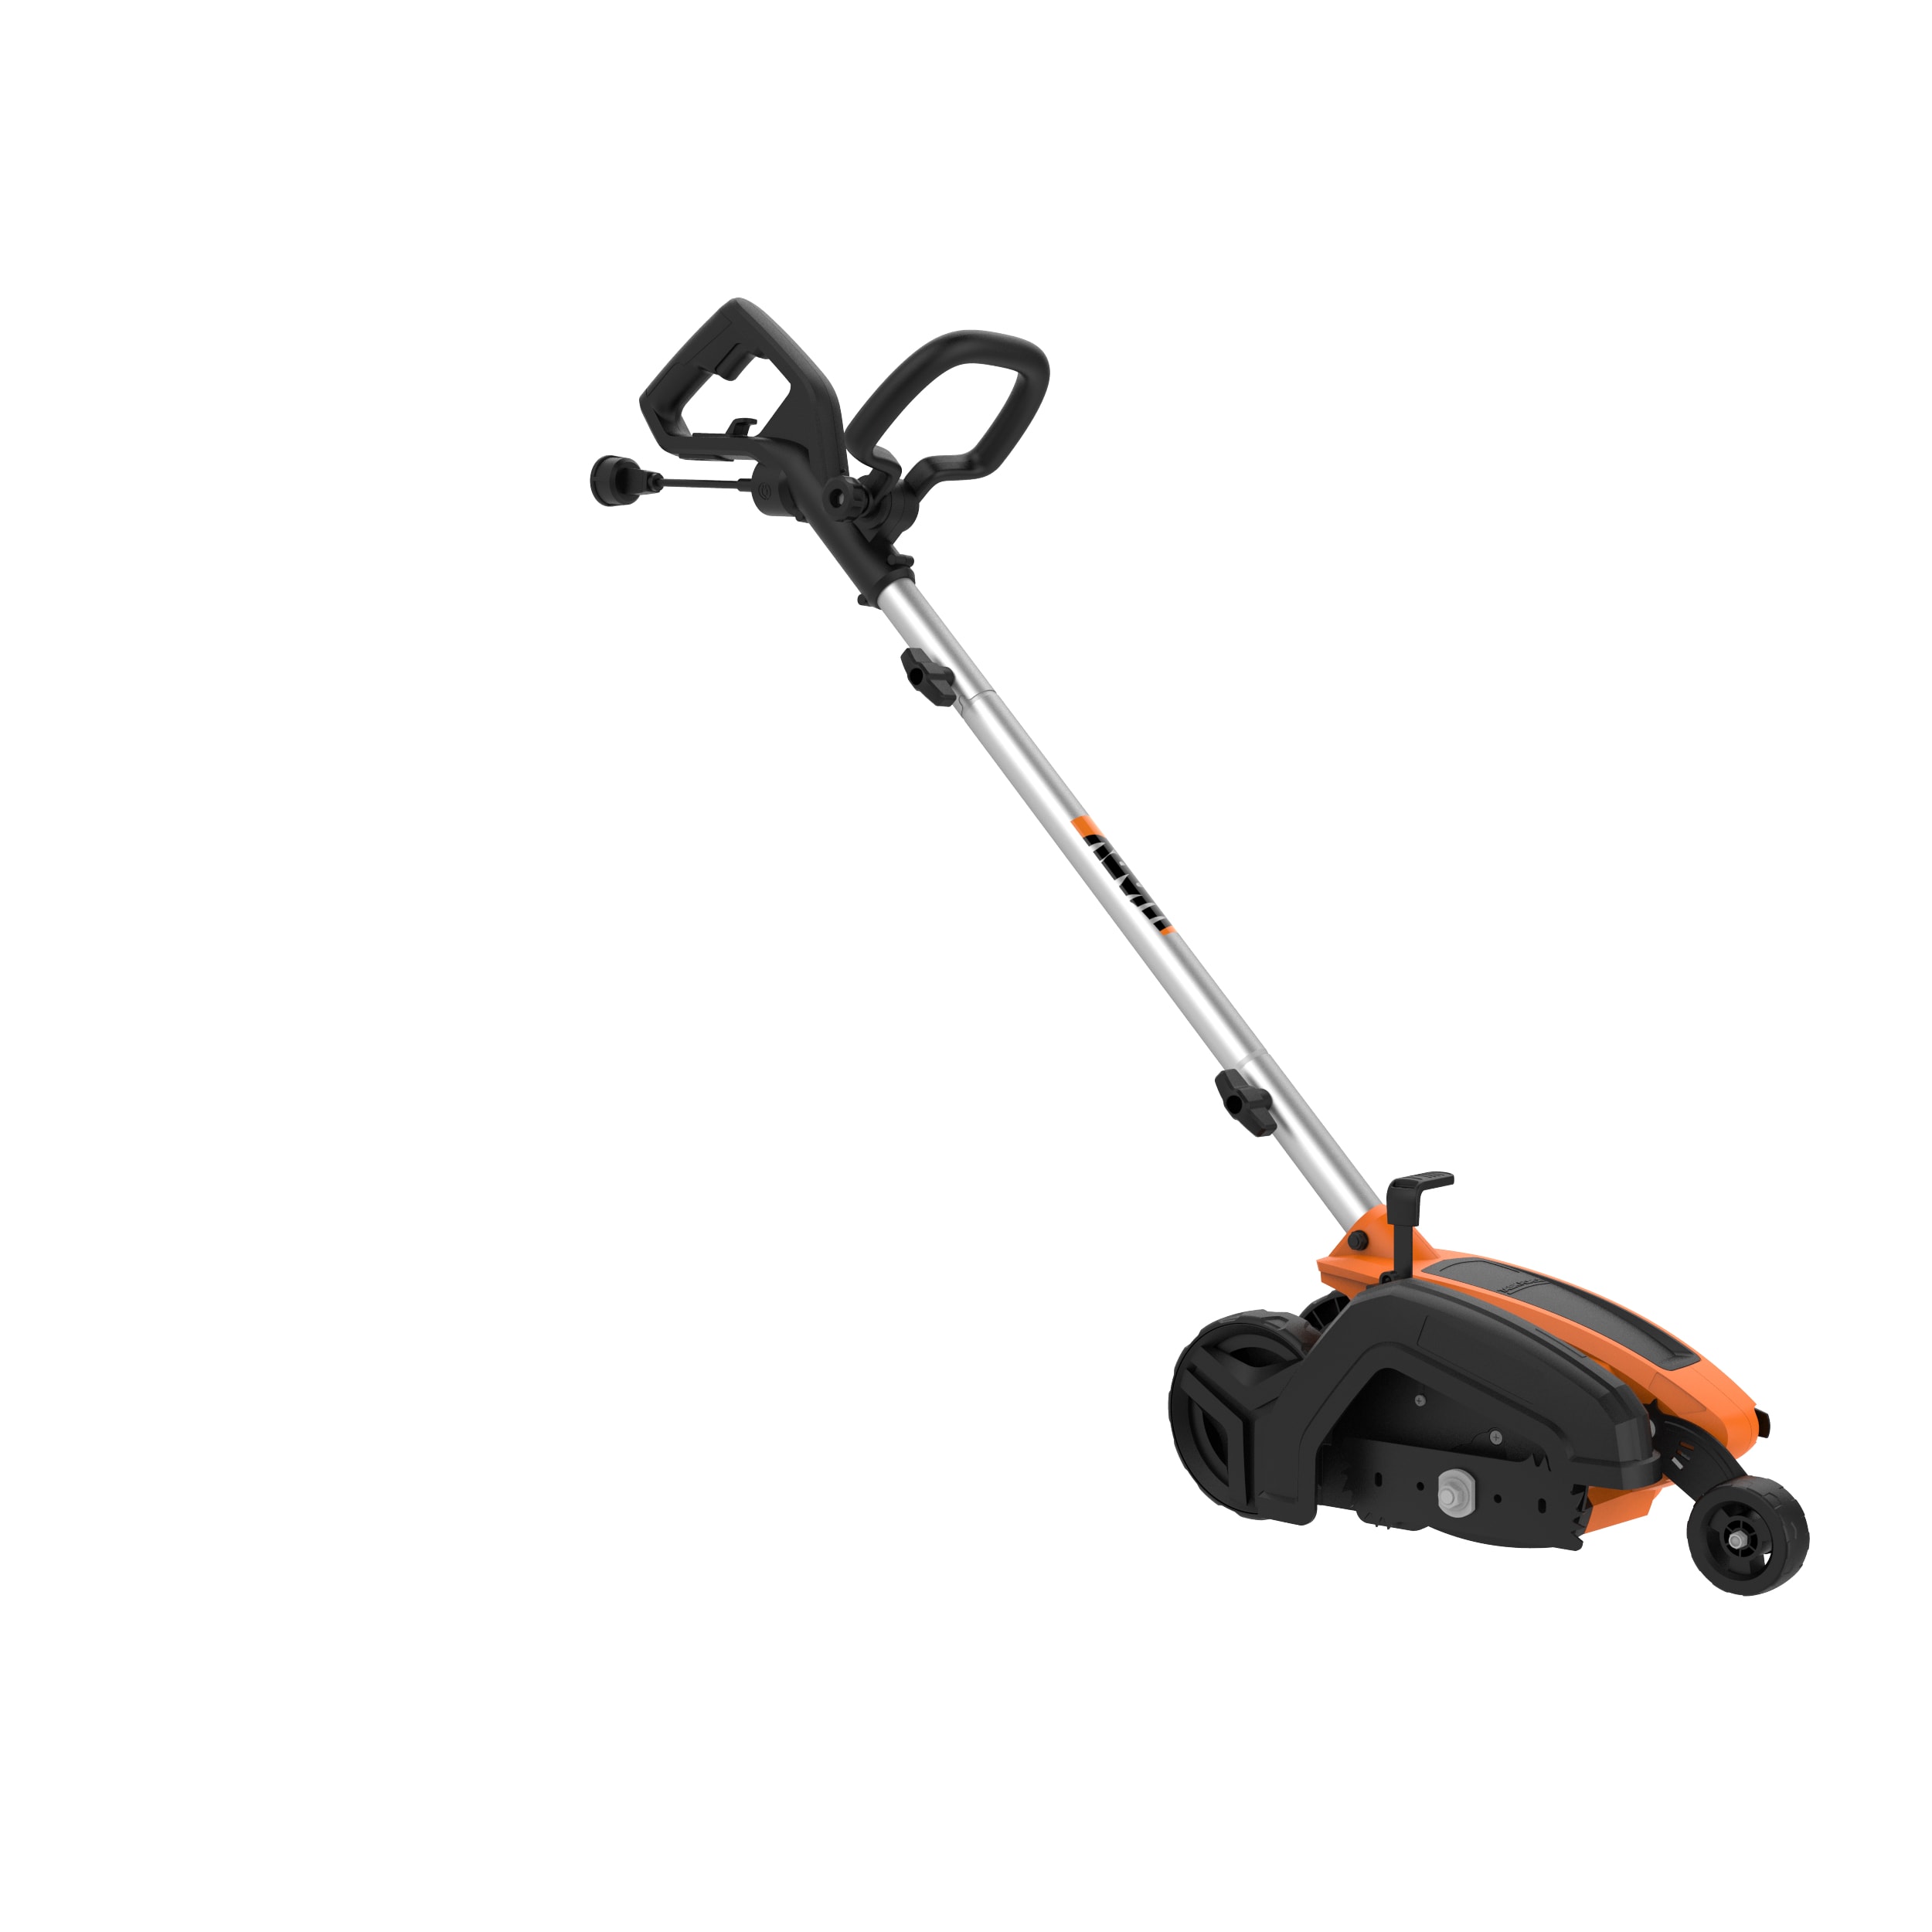 Image of Cordless electric lawn edger at Lowes